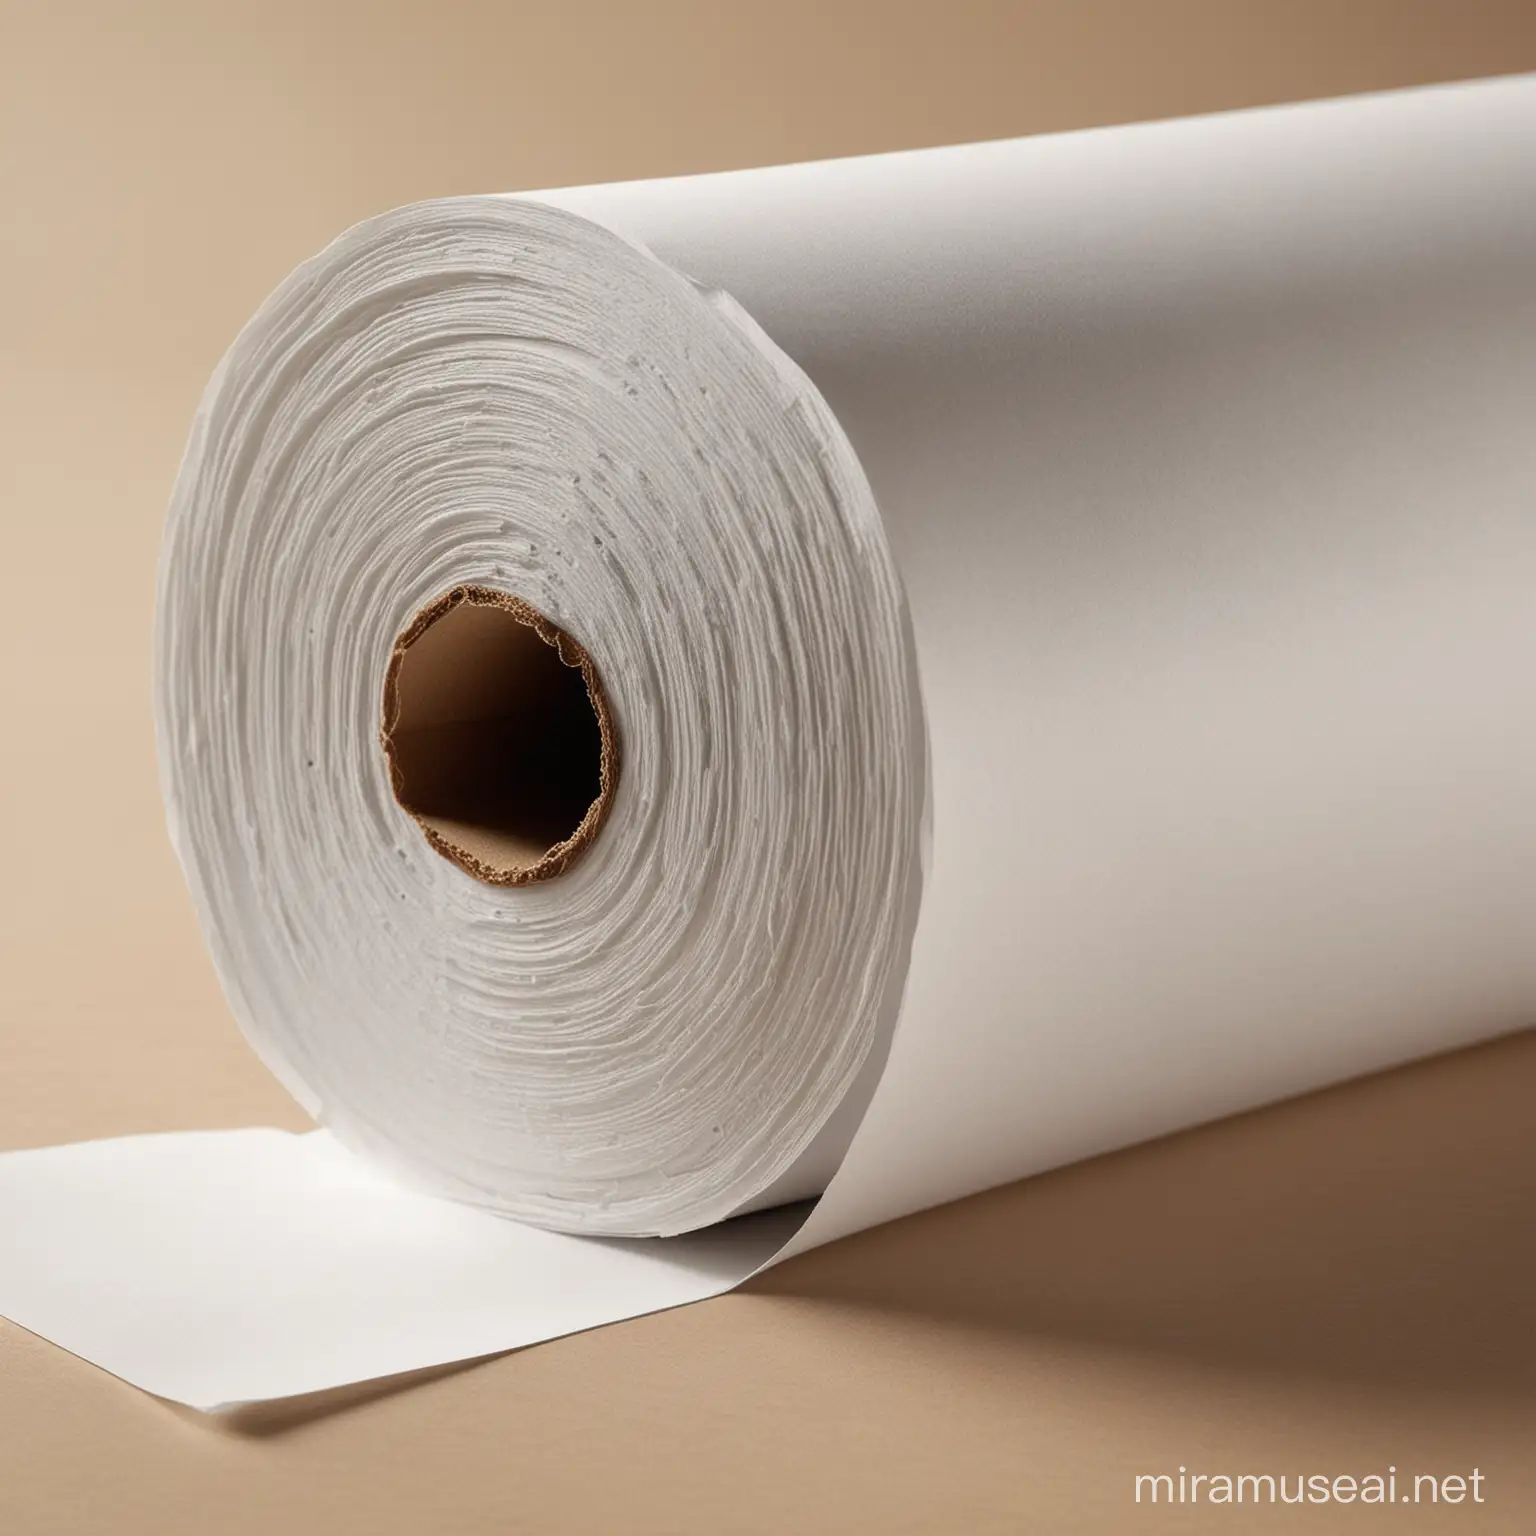 a realistic photo of a roll of paper that looks about 60 inches wide and has a core on the inside, neatly wound.